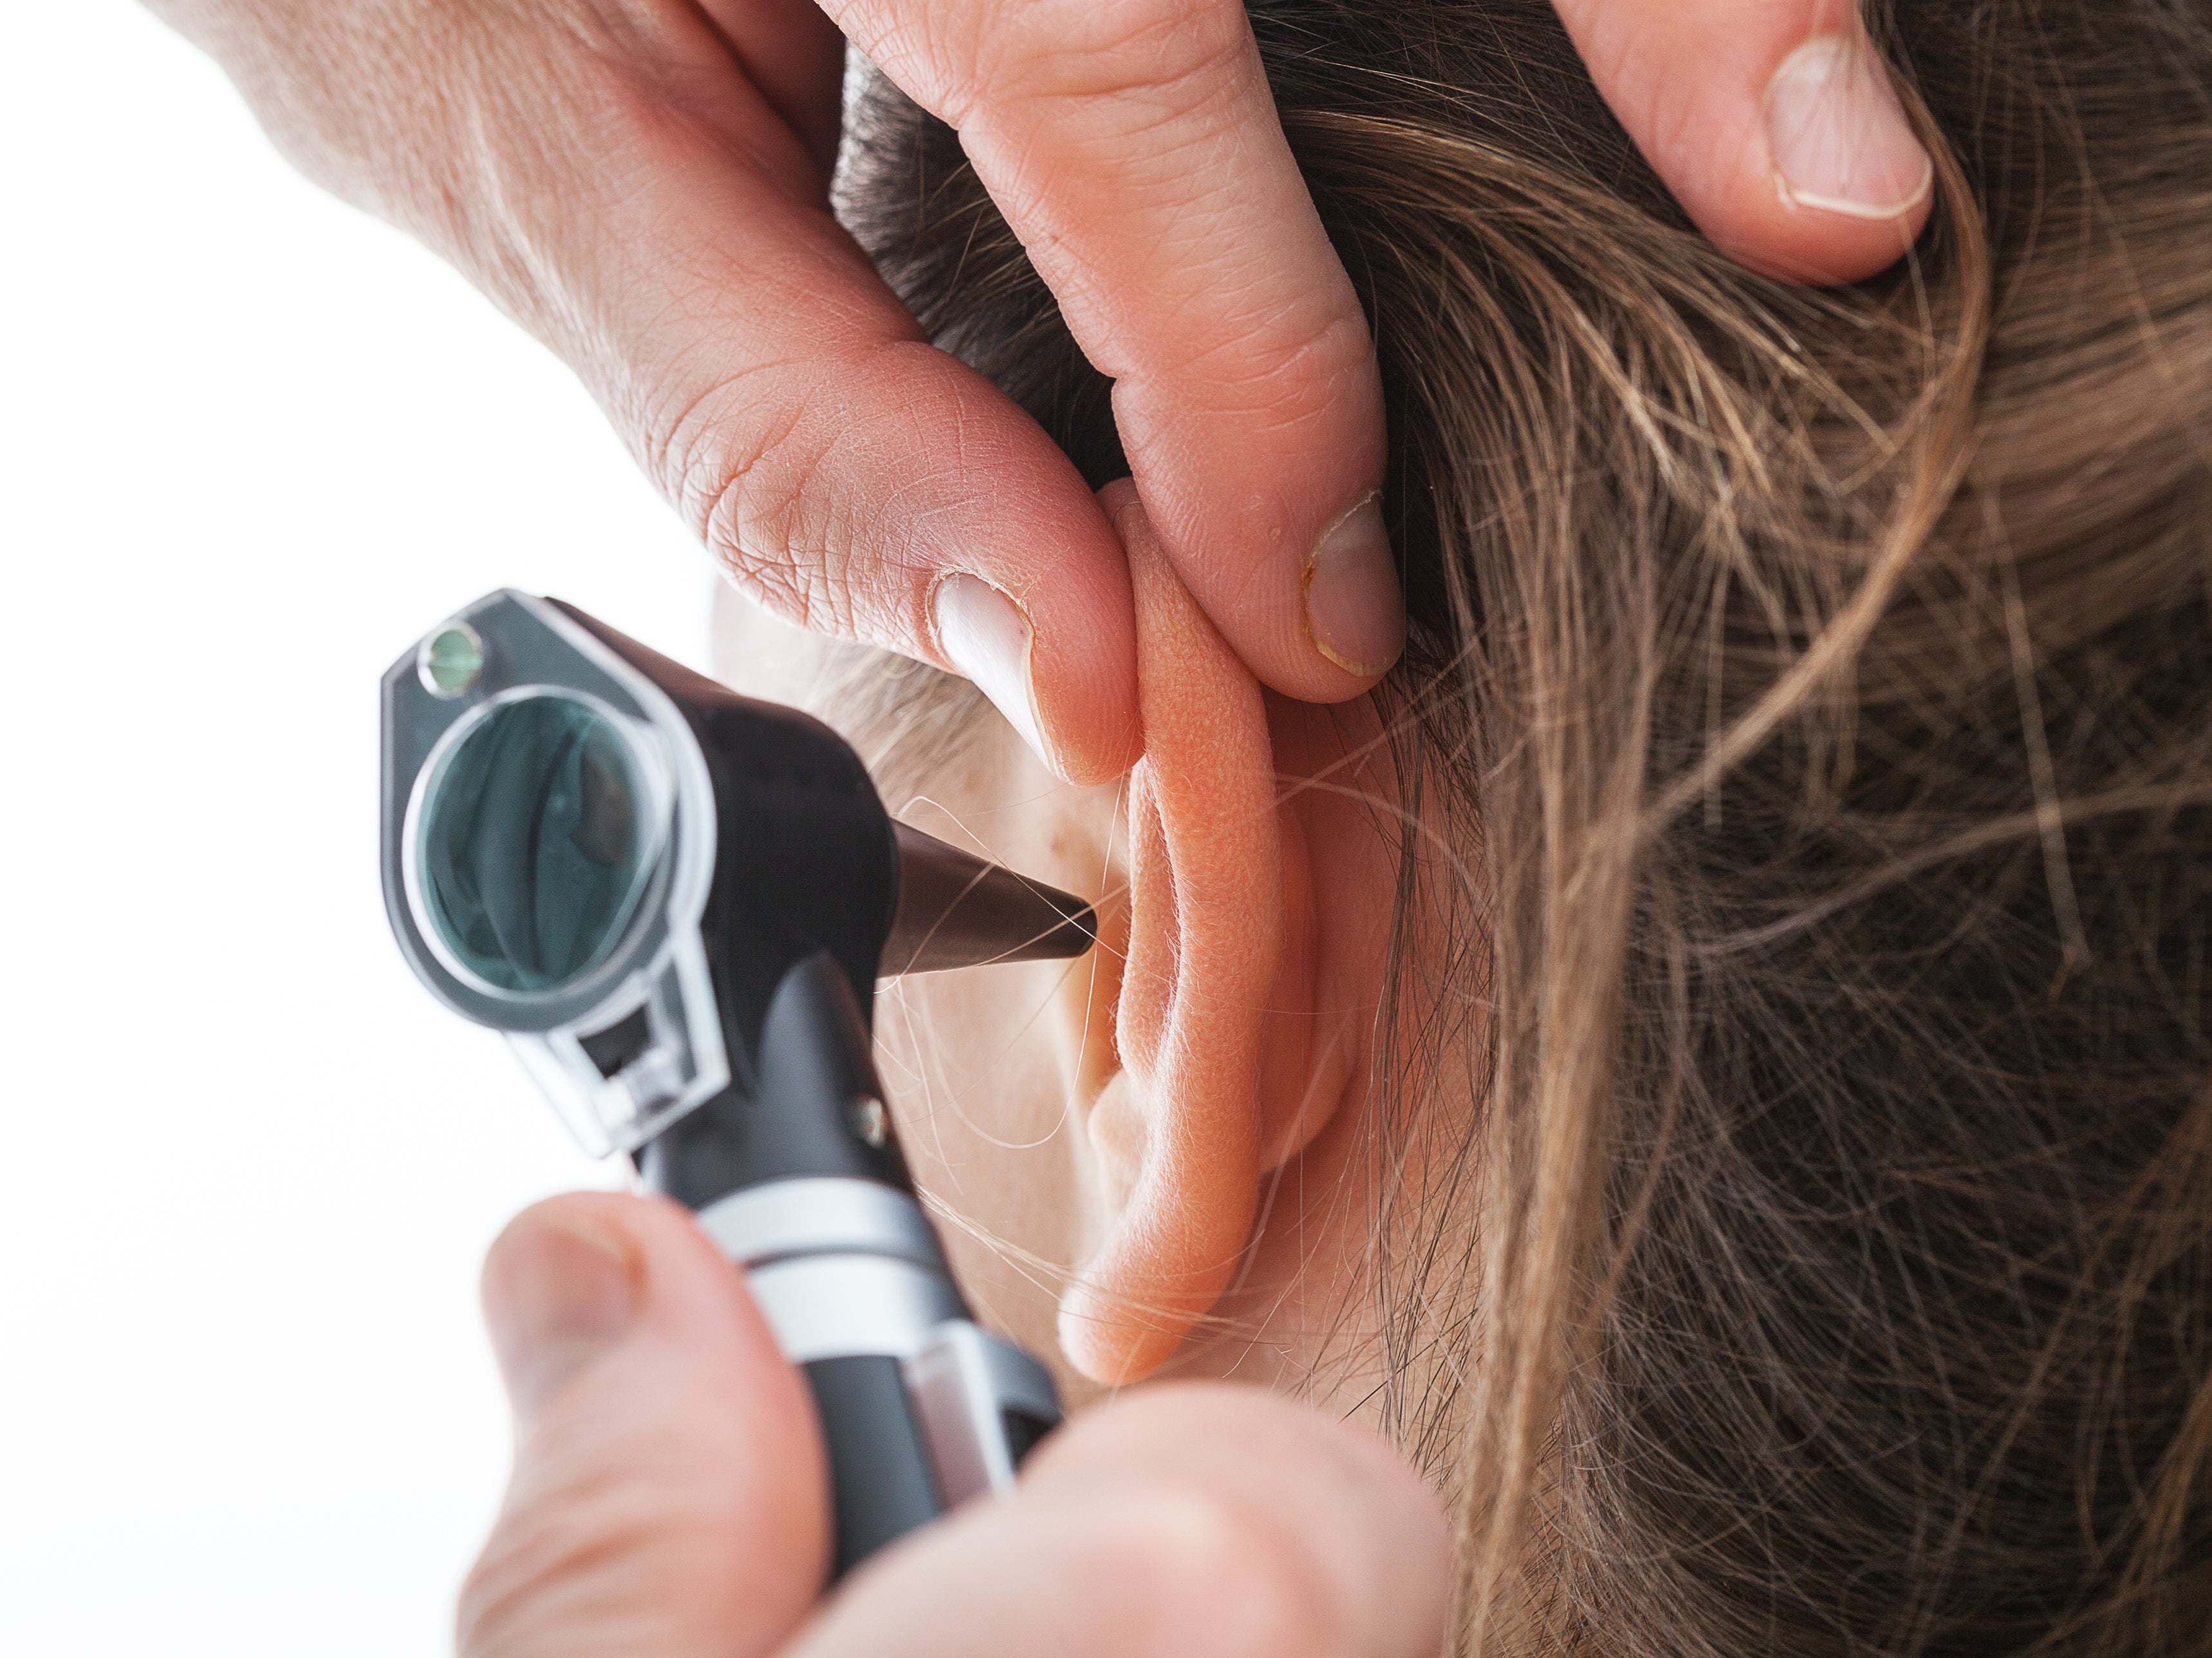 An ear exam being carried out with an otoscope